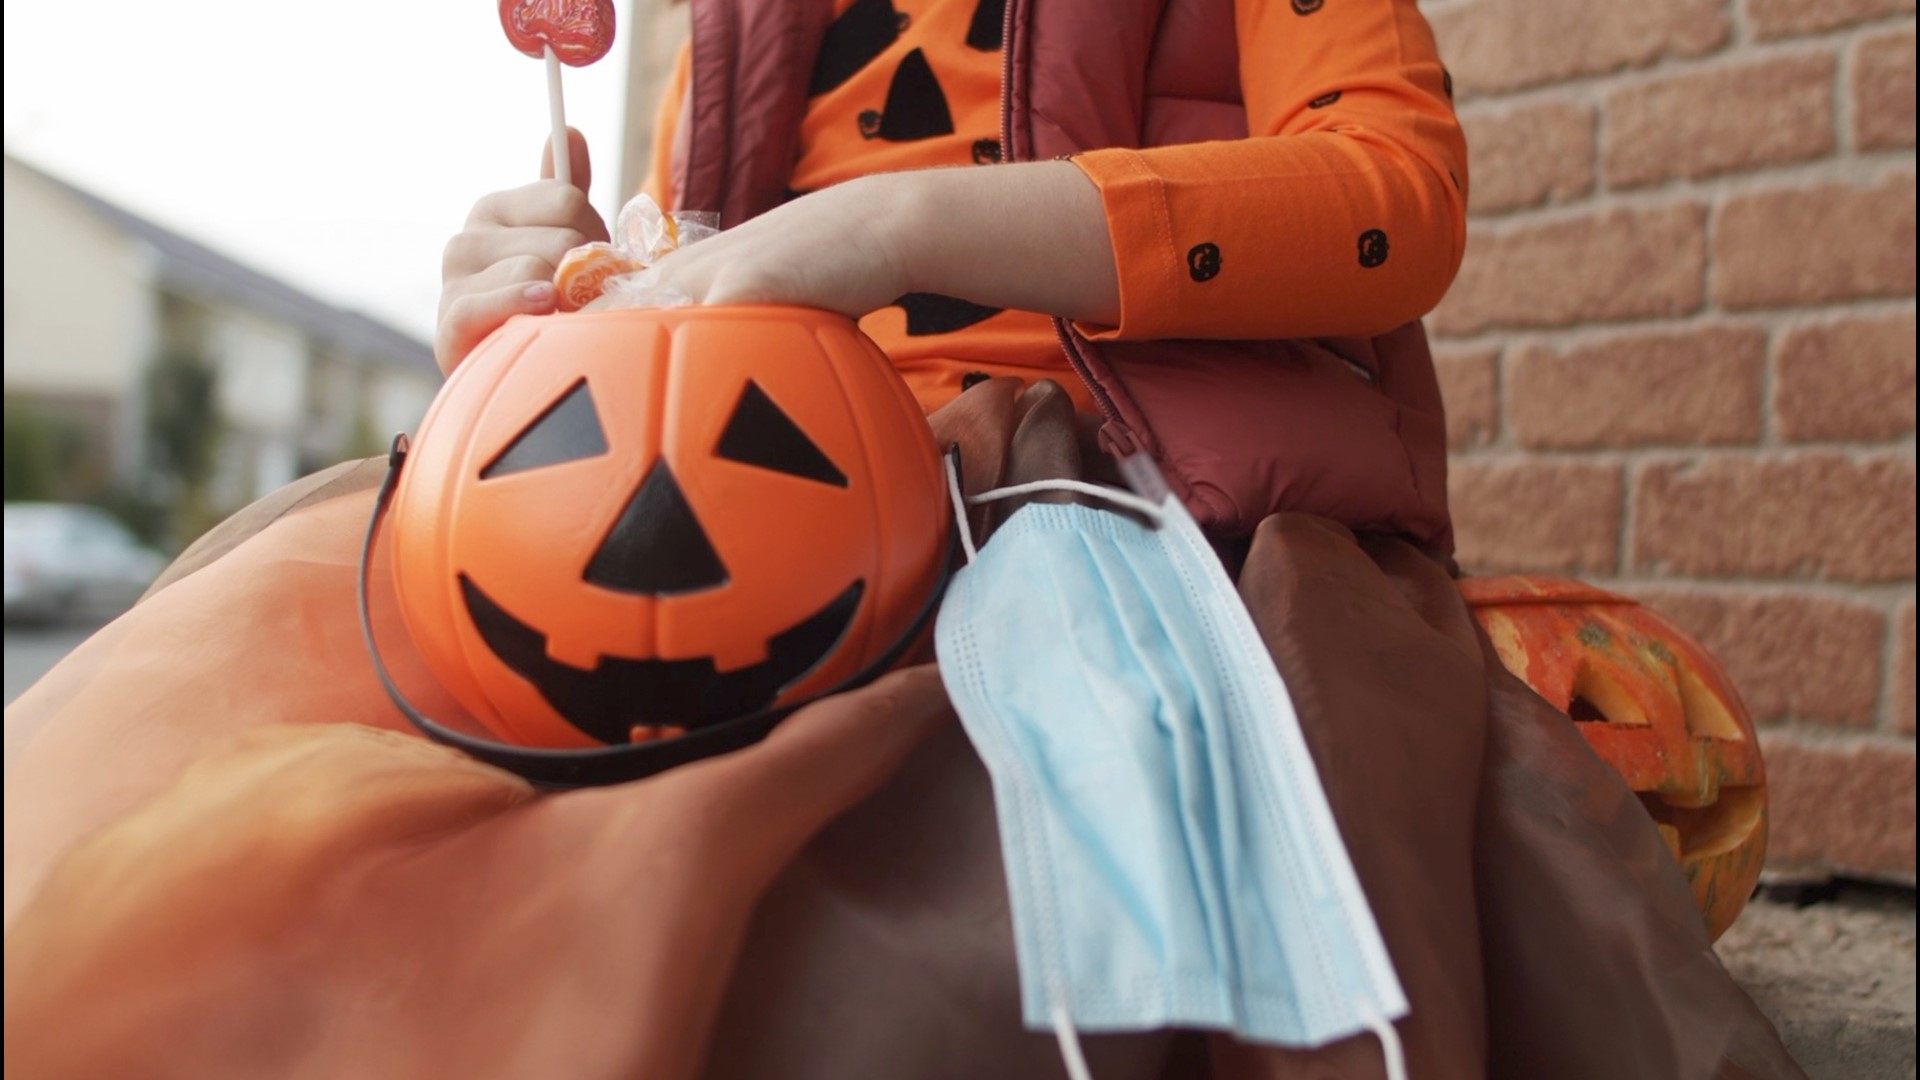 Trick-or-treating this year can be on your Halloween list providing health recommendations are considered. Buzz60's Chloe Hurst has the story!